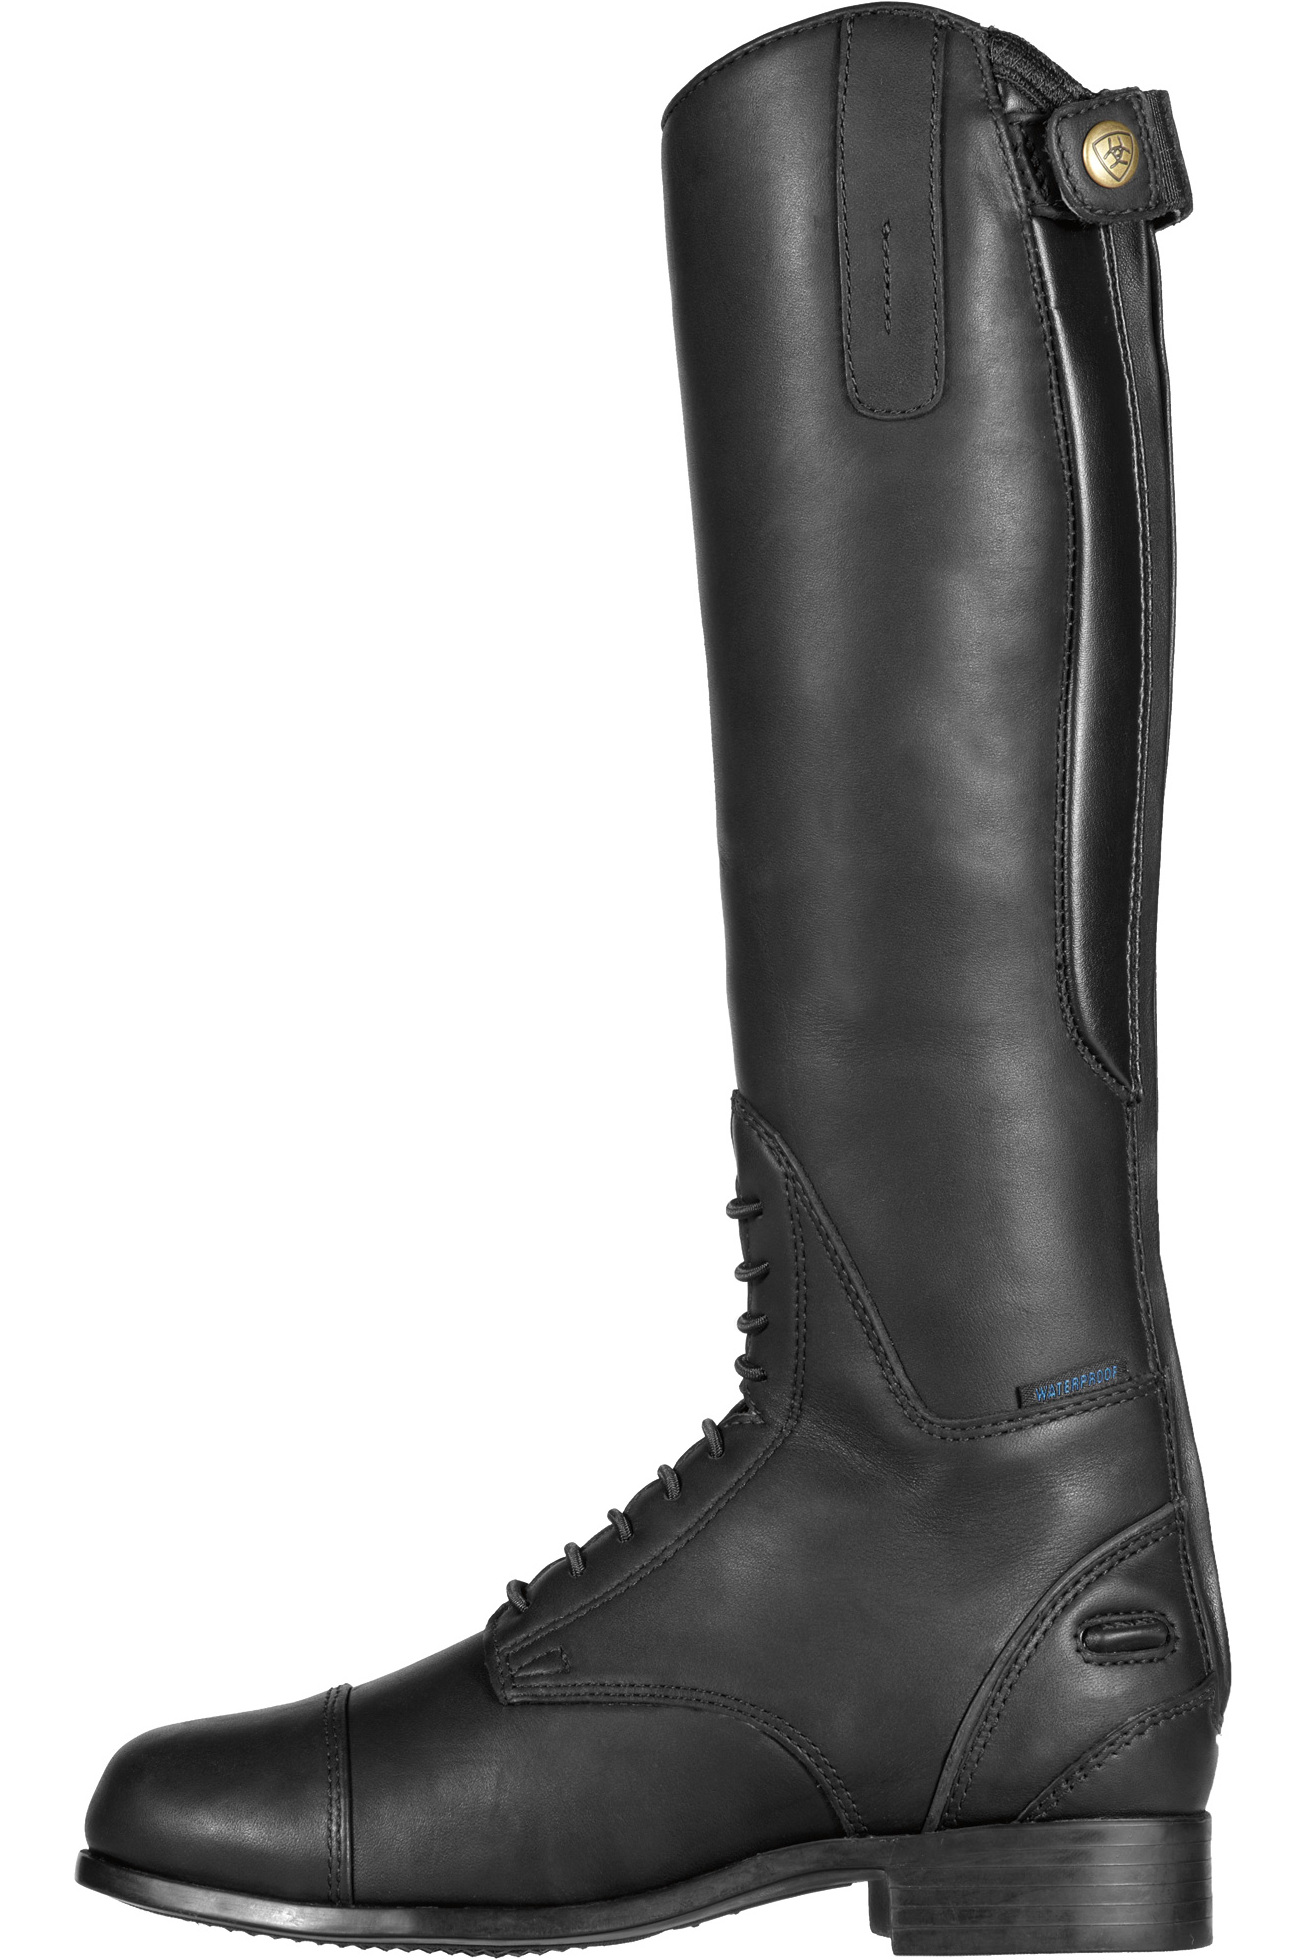 Ariat Childrens Bromont H20 Tall Riding Boots - Black | The Drillshed